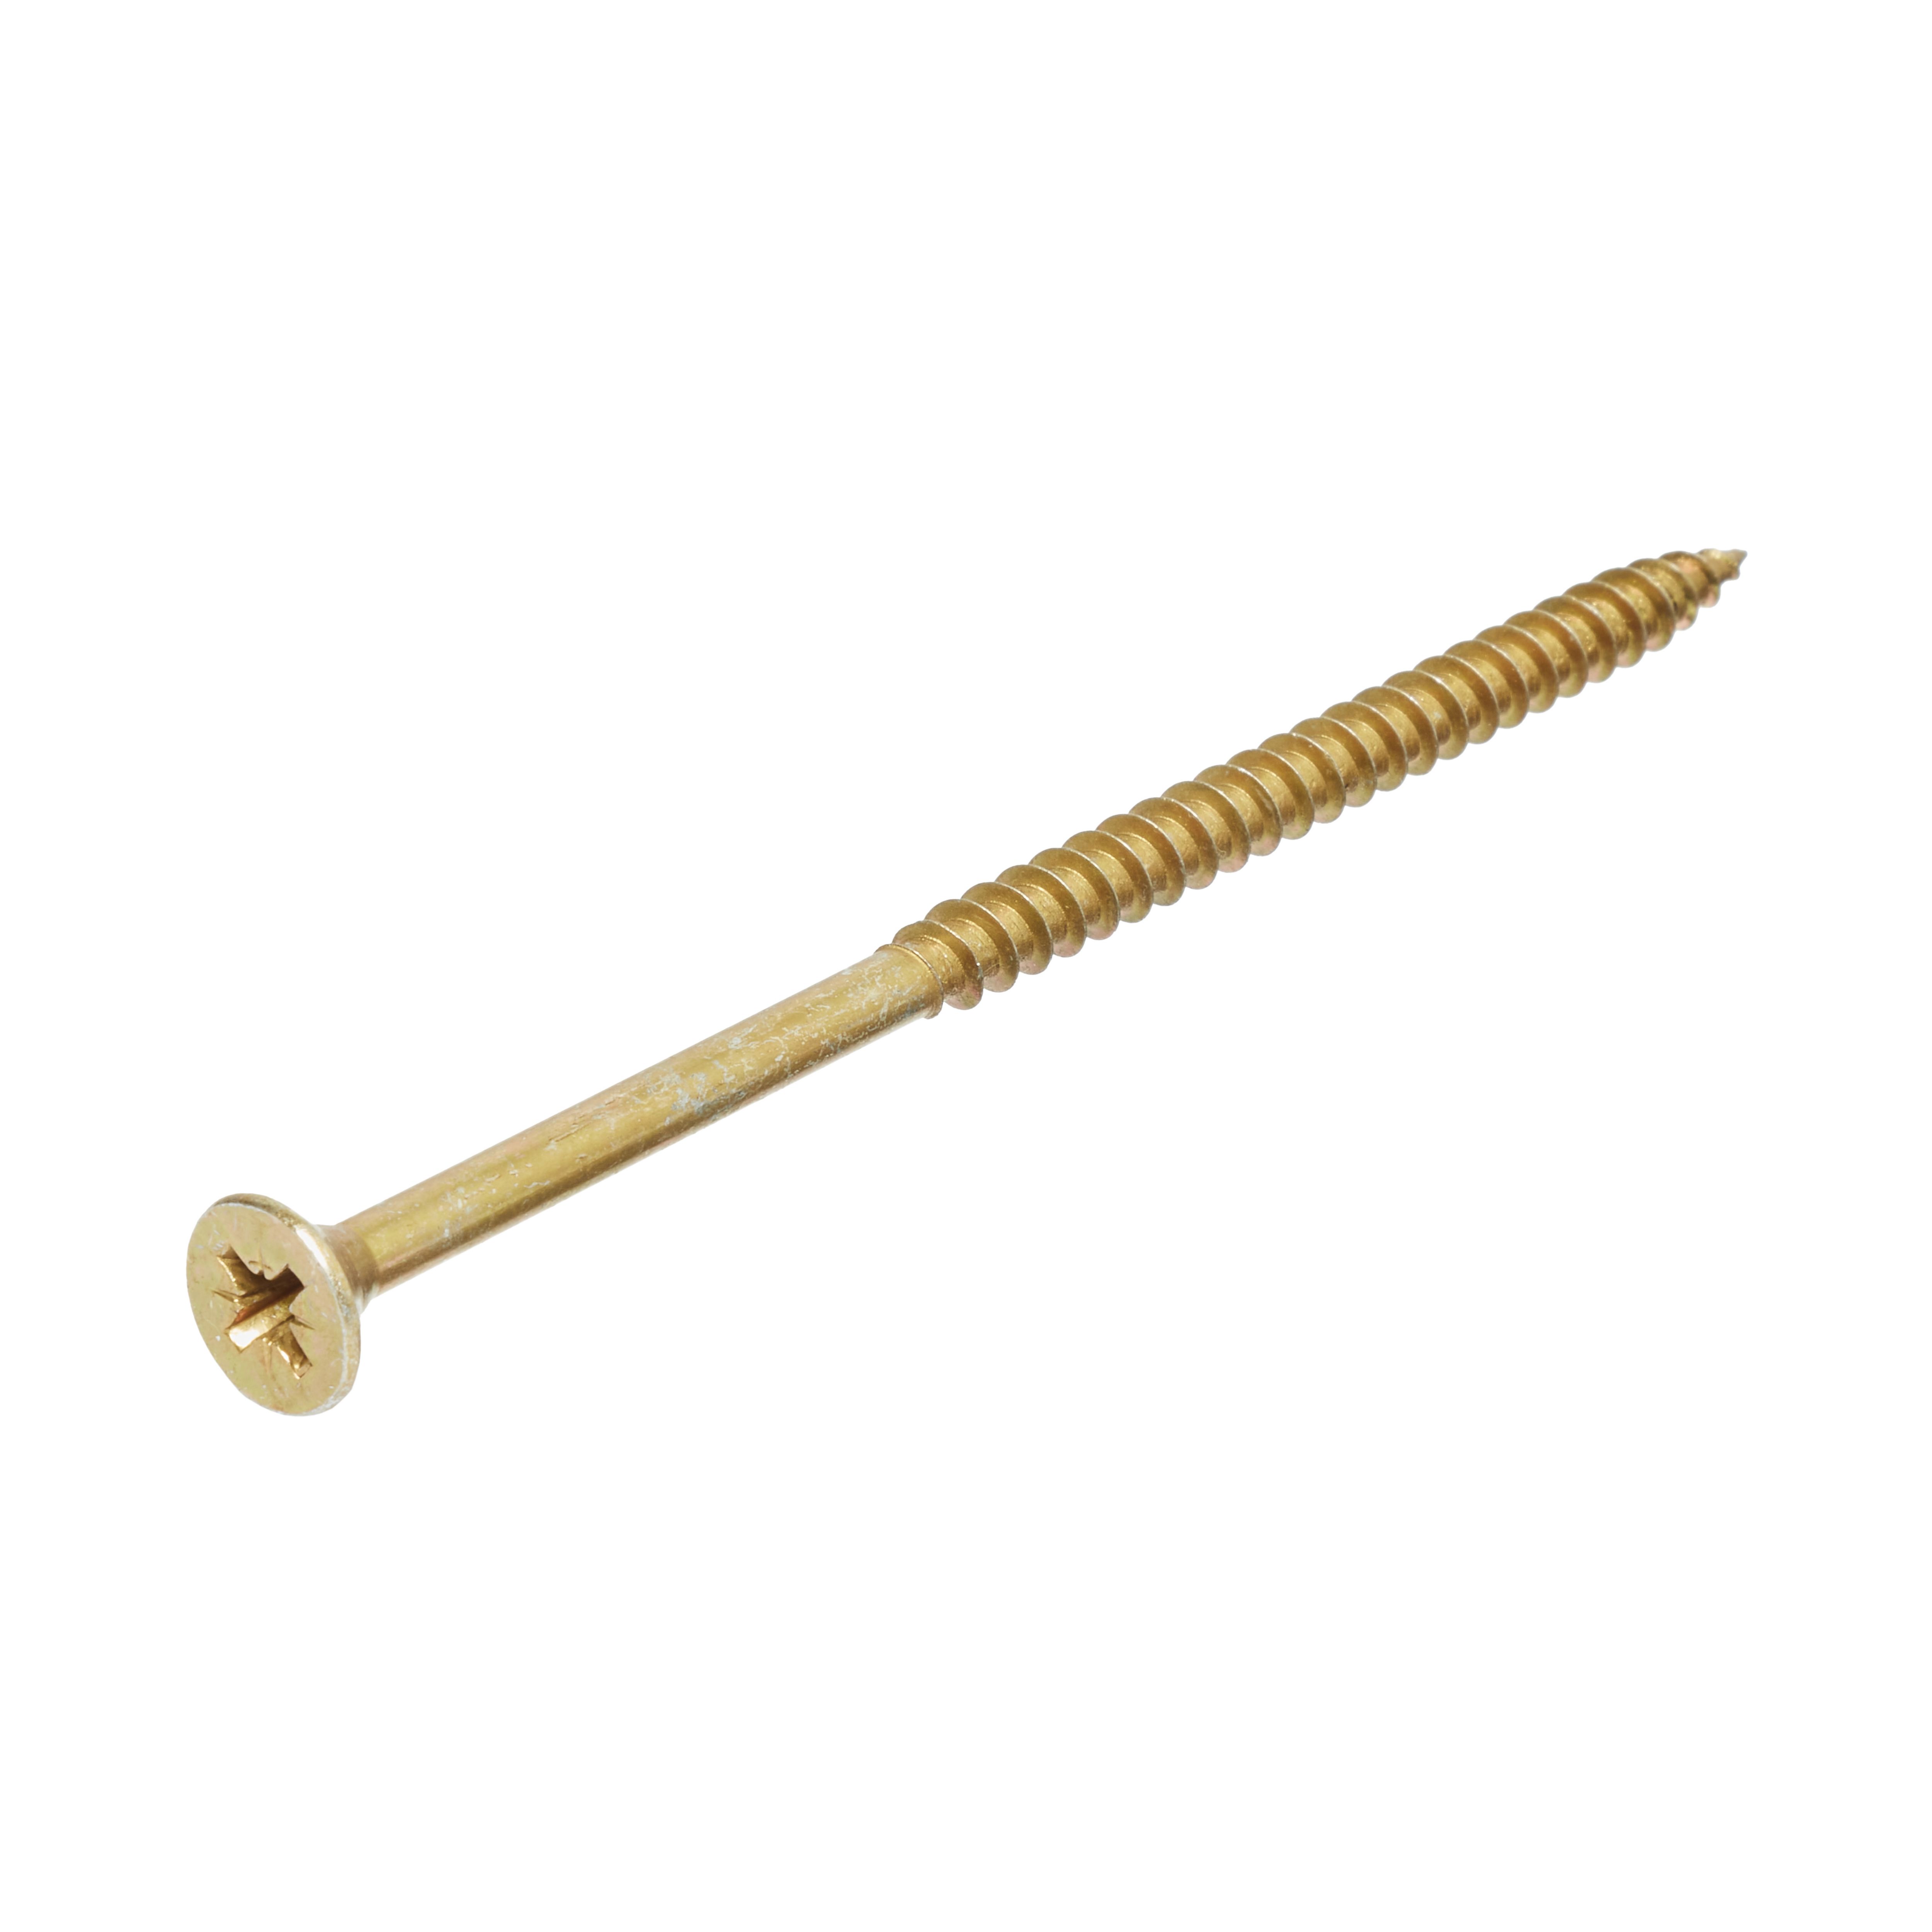 Goldscrew PZ Double-countersunk Yellow-passivated Carbon steel Screw (Dia)5mm (L)100mm, Pack of 100